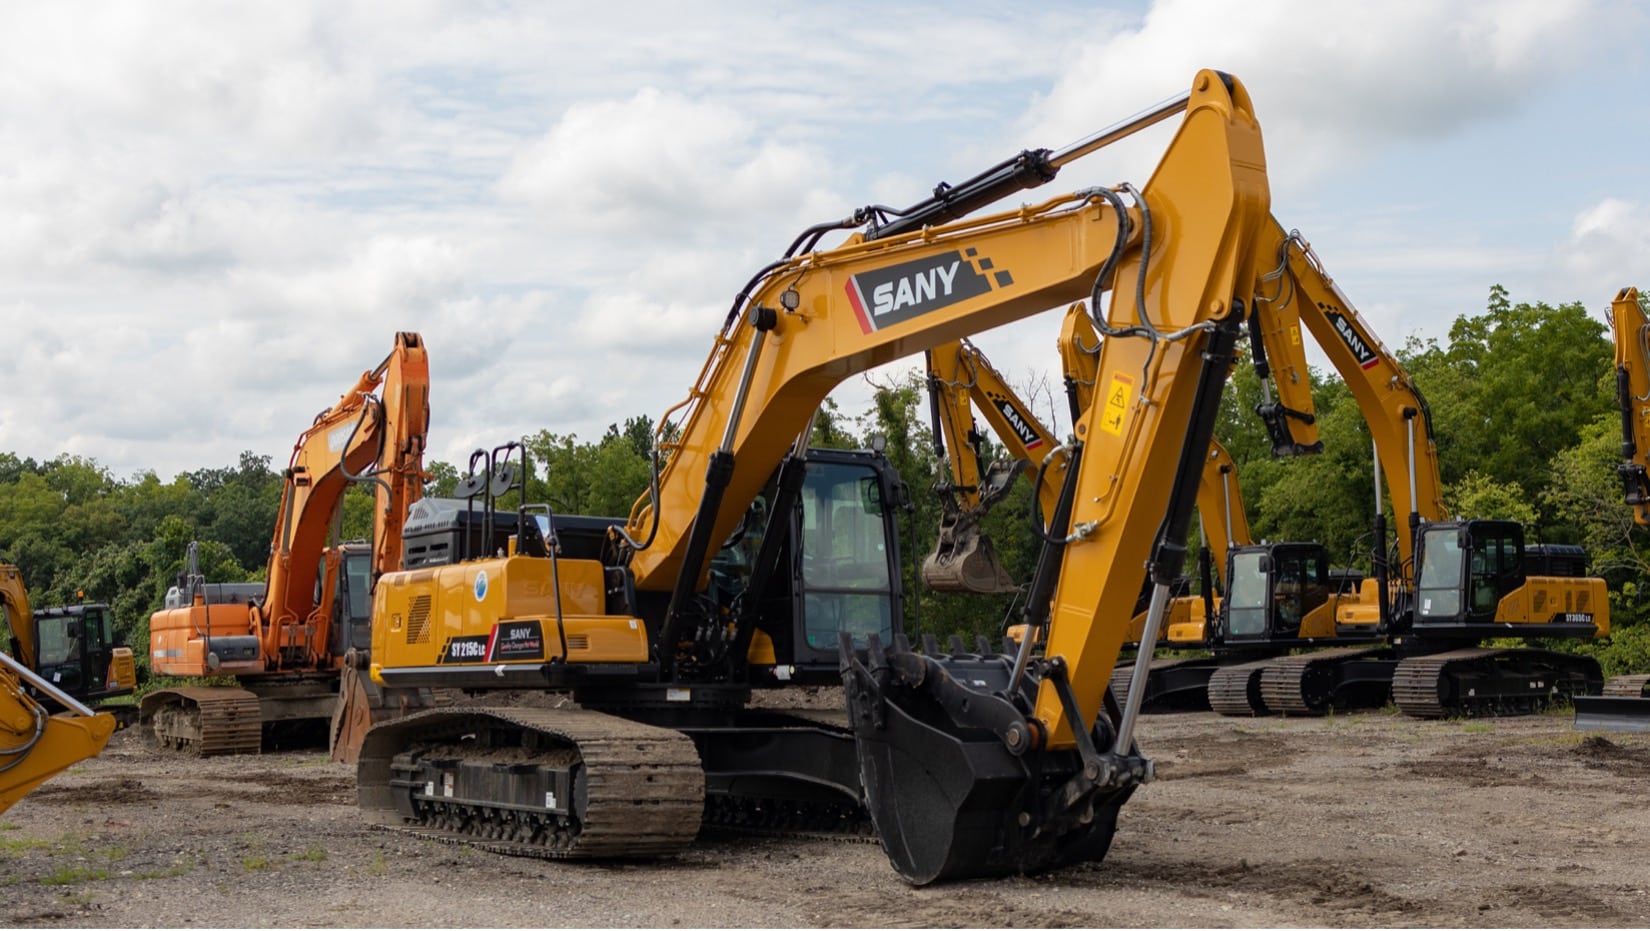 6 Reasons You Need a New Construction Equipment Dealer in Kansas City